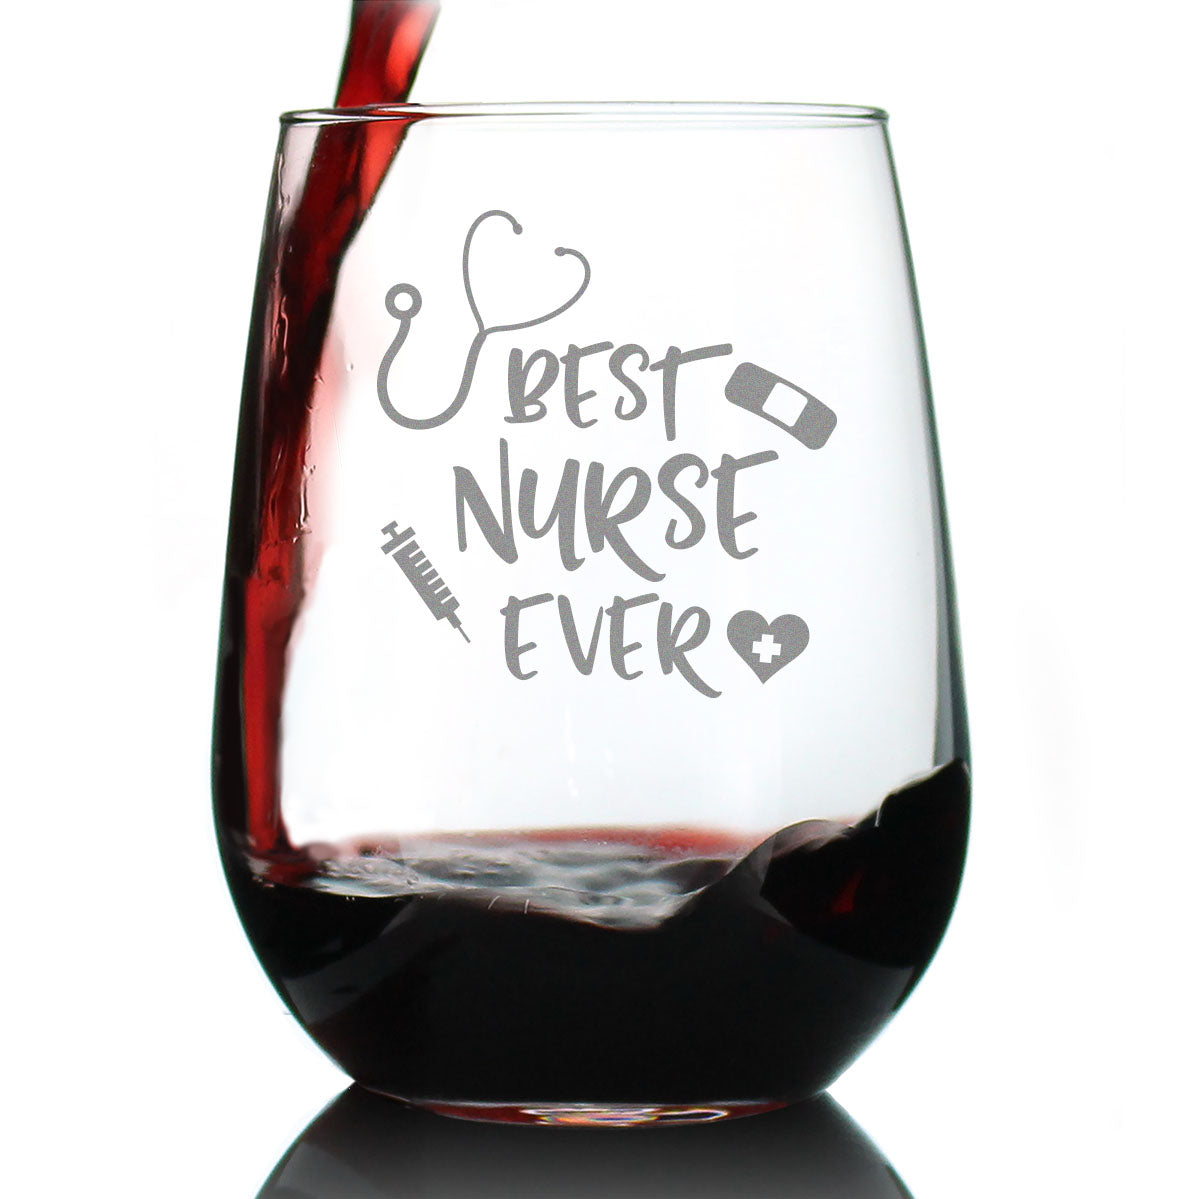 Best Nurse Ever - Stemless Wine Glass for Nurses, RN - Cute Medical Themed Gifts for Women and Men - Large 17 oz